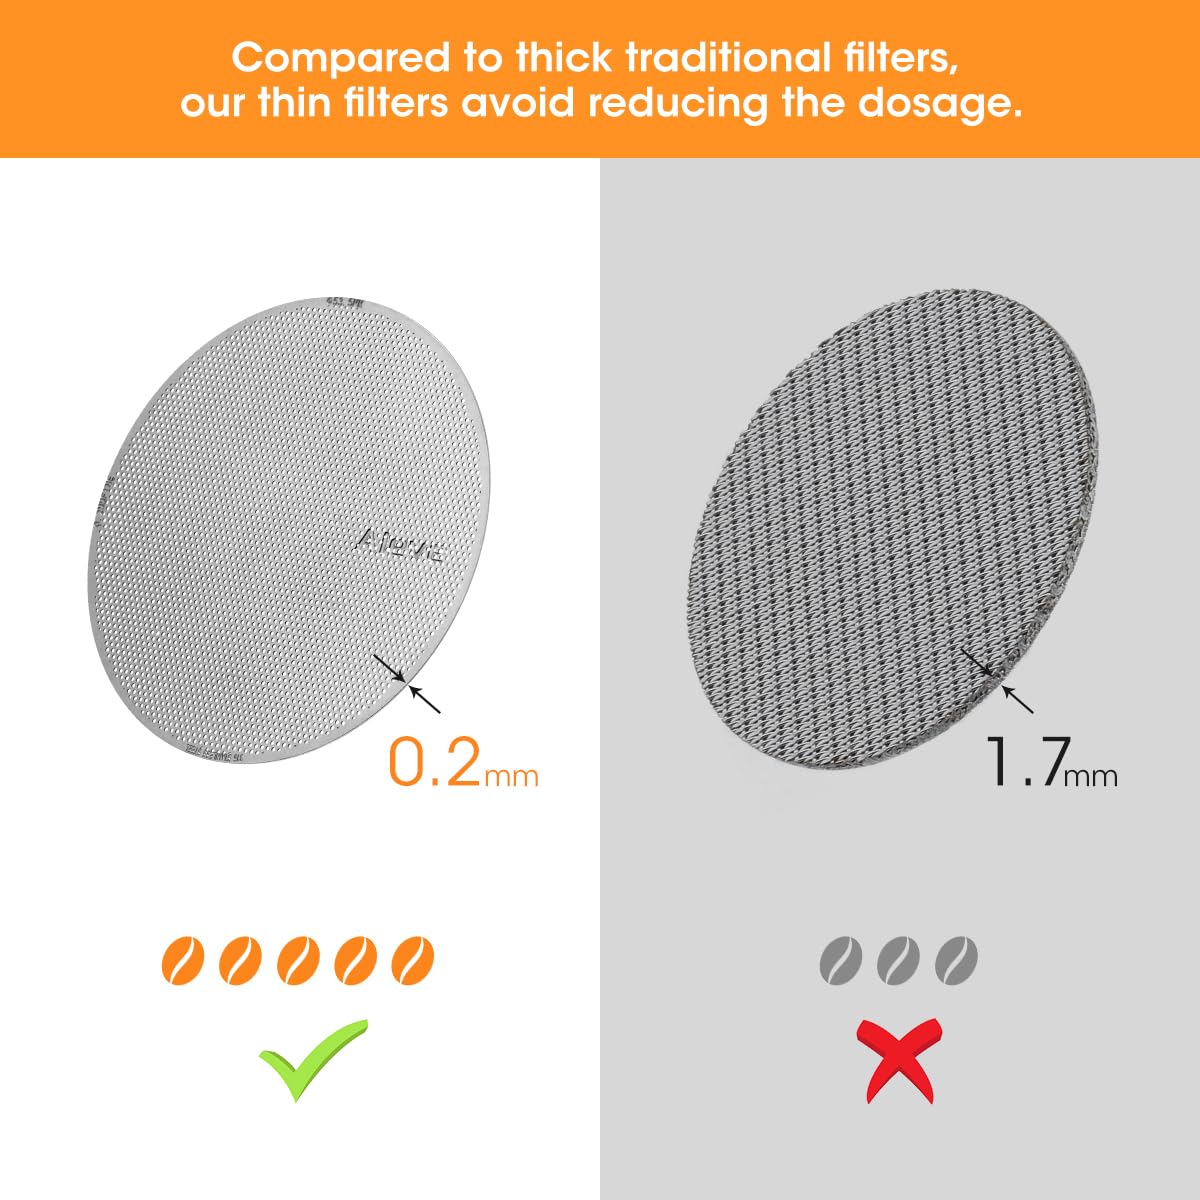 Compared to thick traditional filters, our thin filters avoid reducing the dosage.